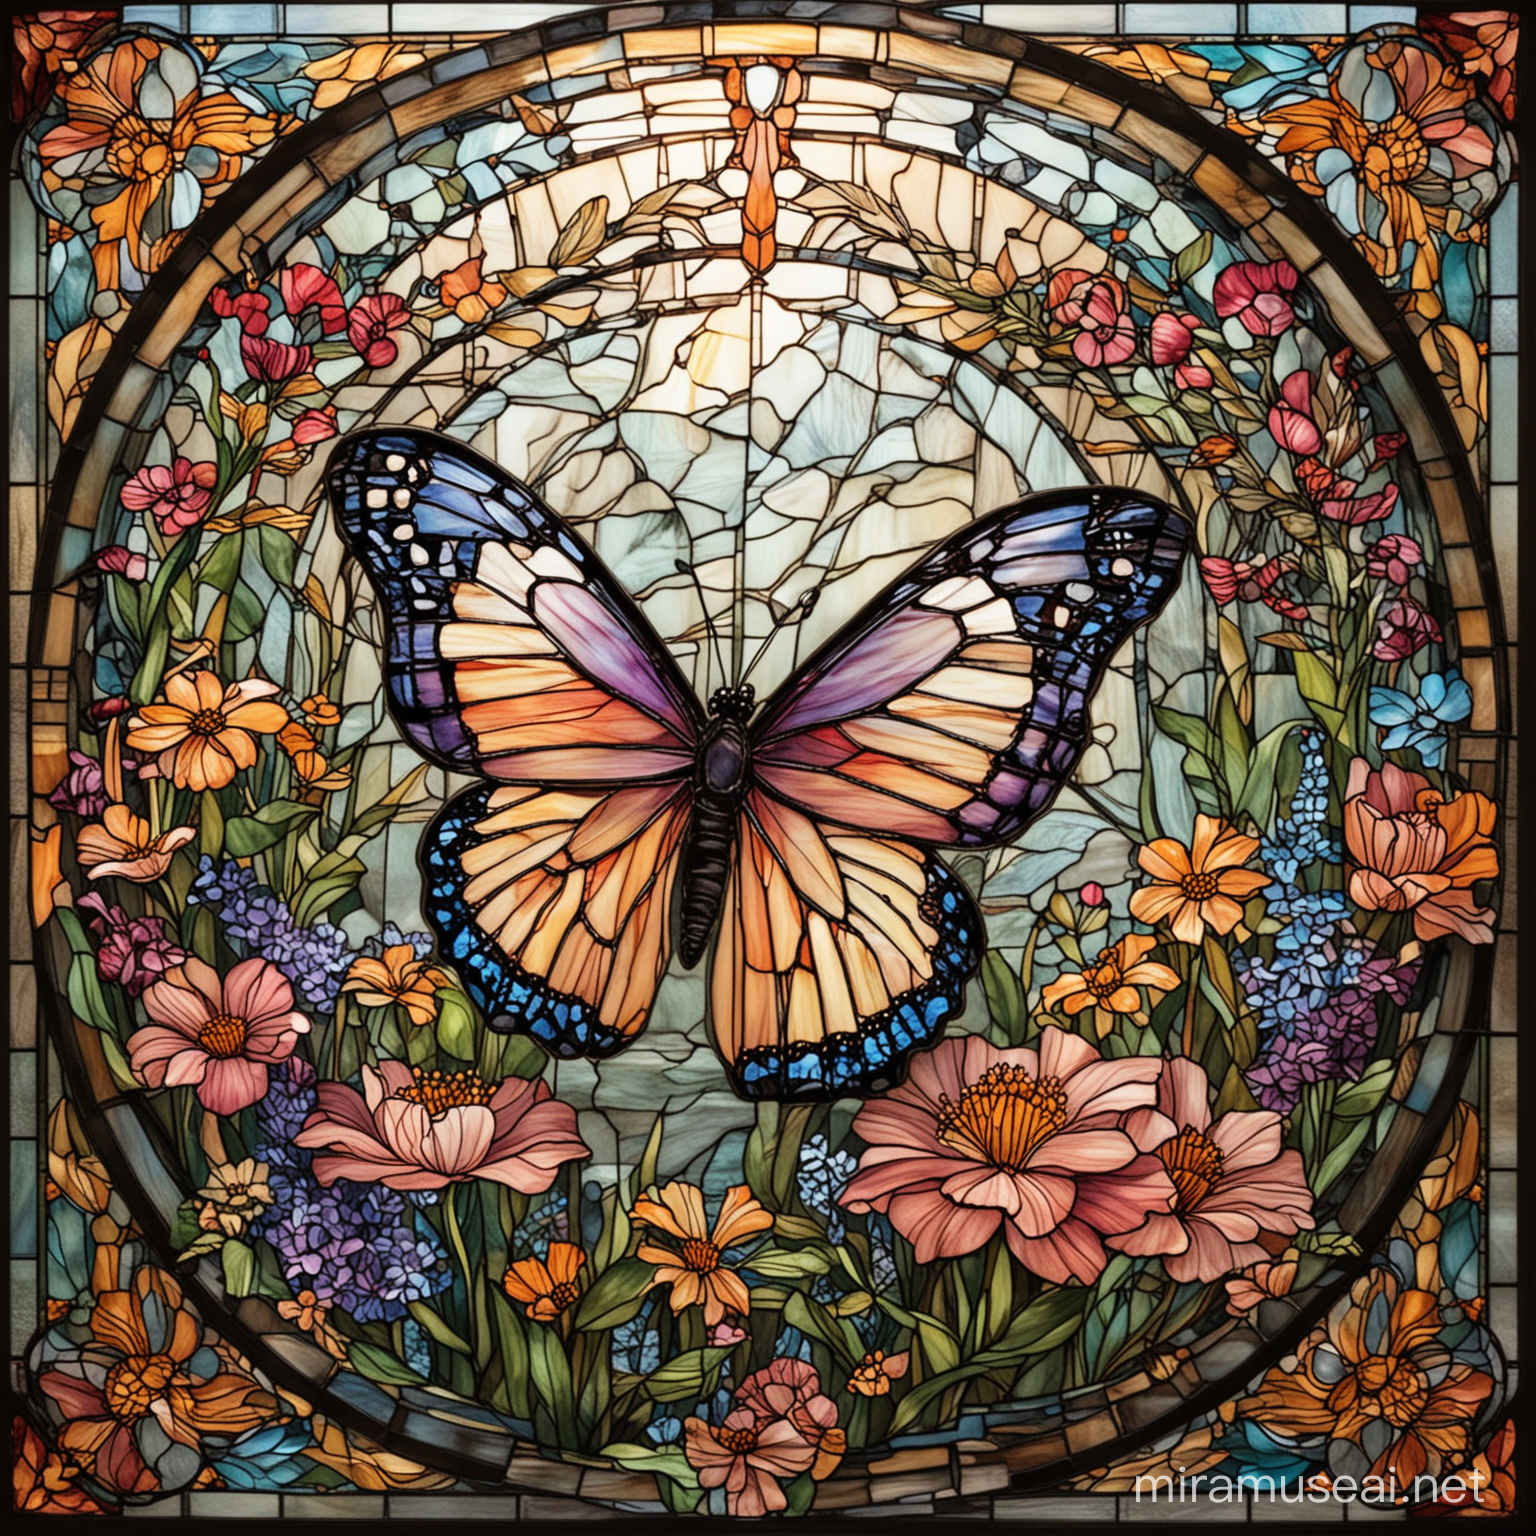 Elegant Butterfly amidst Vibrant Stained Glass Flowers